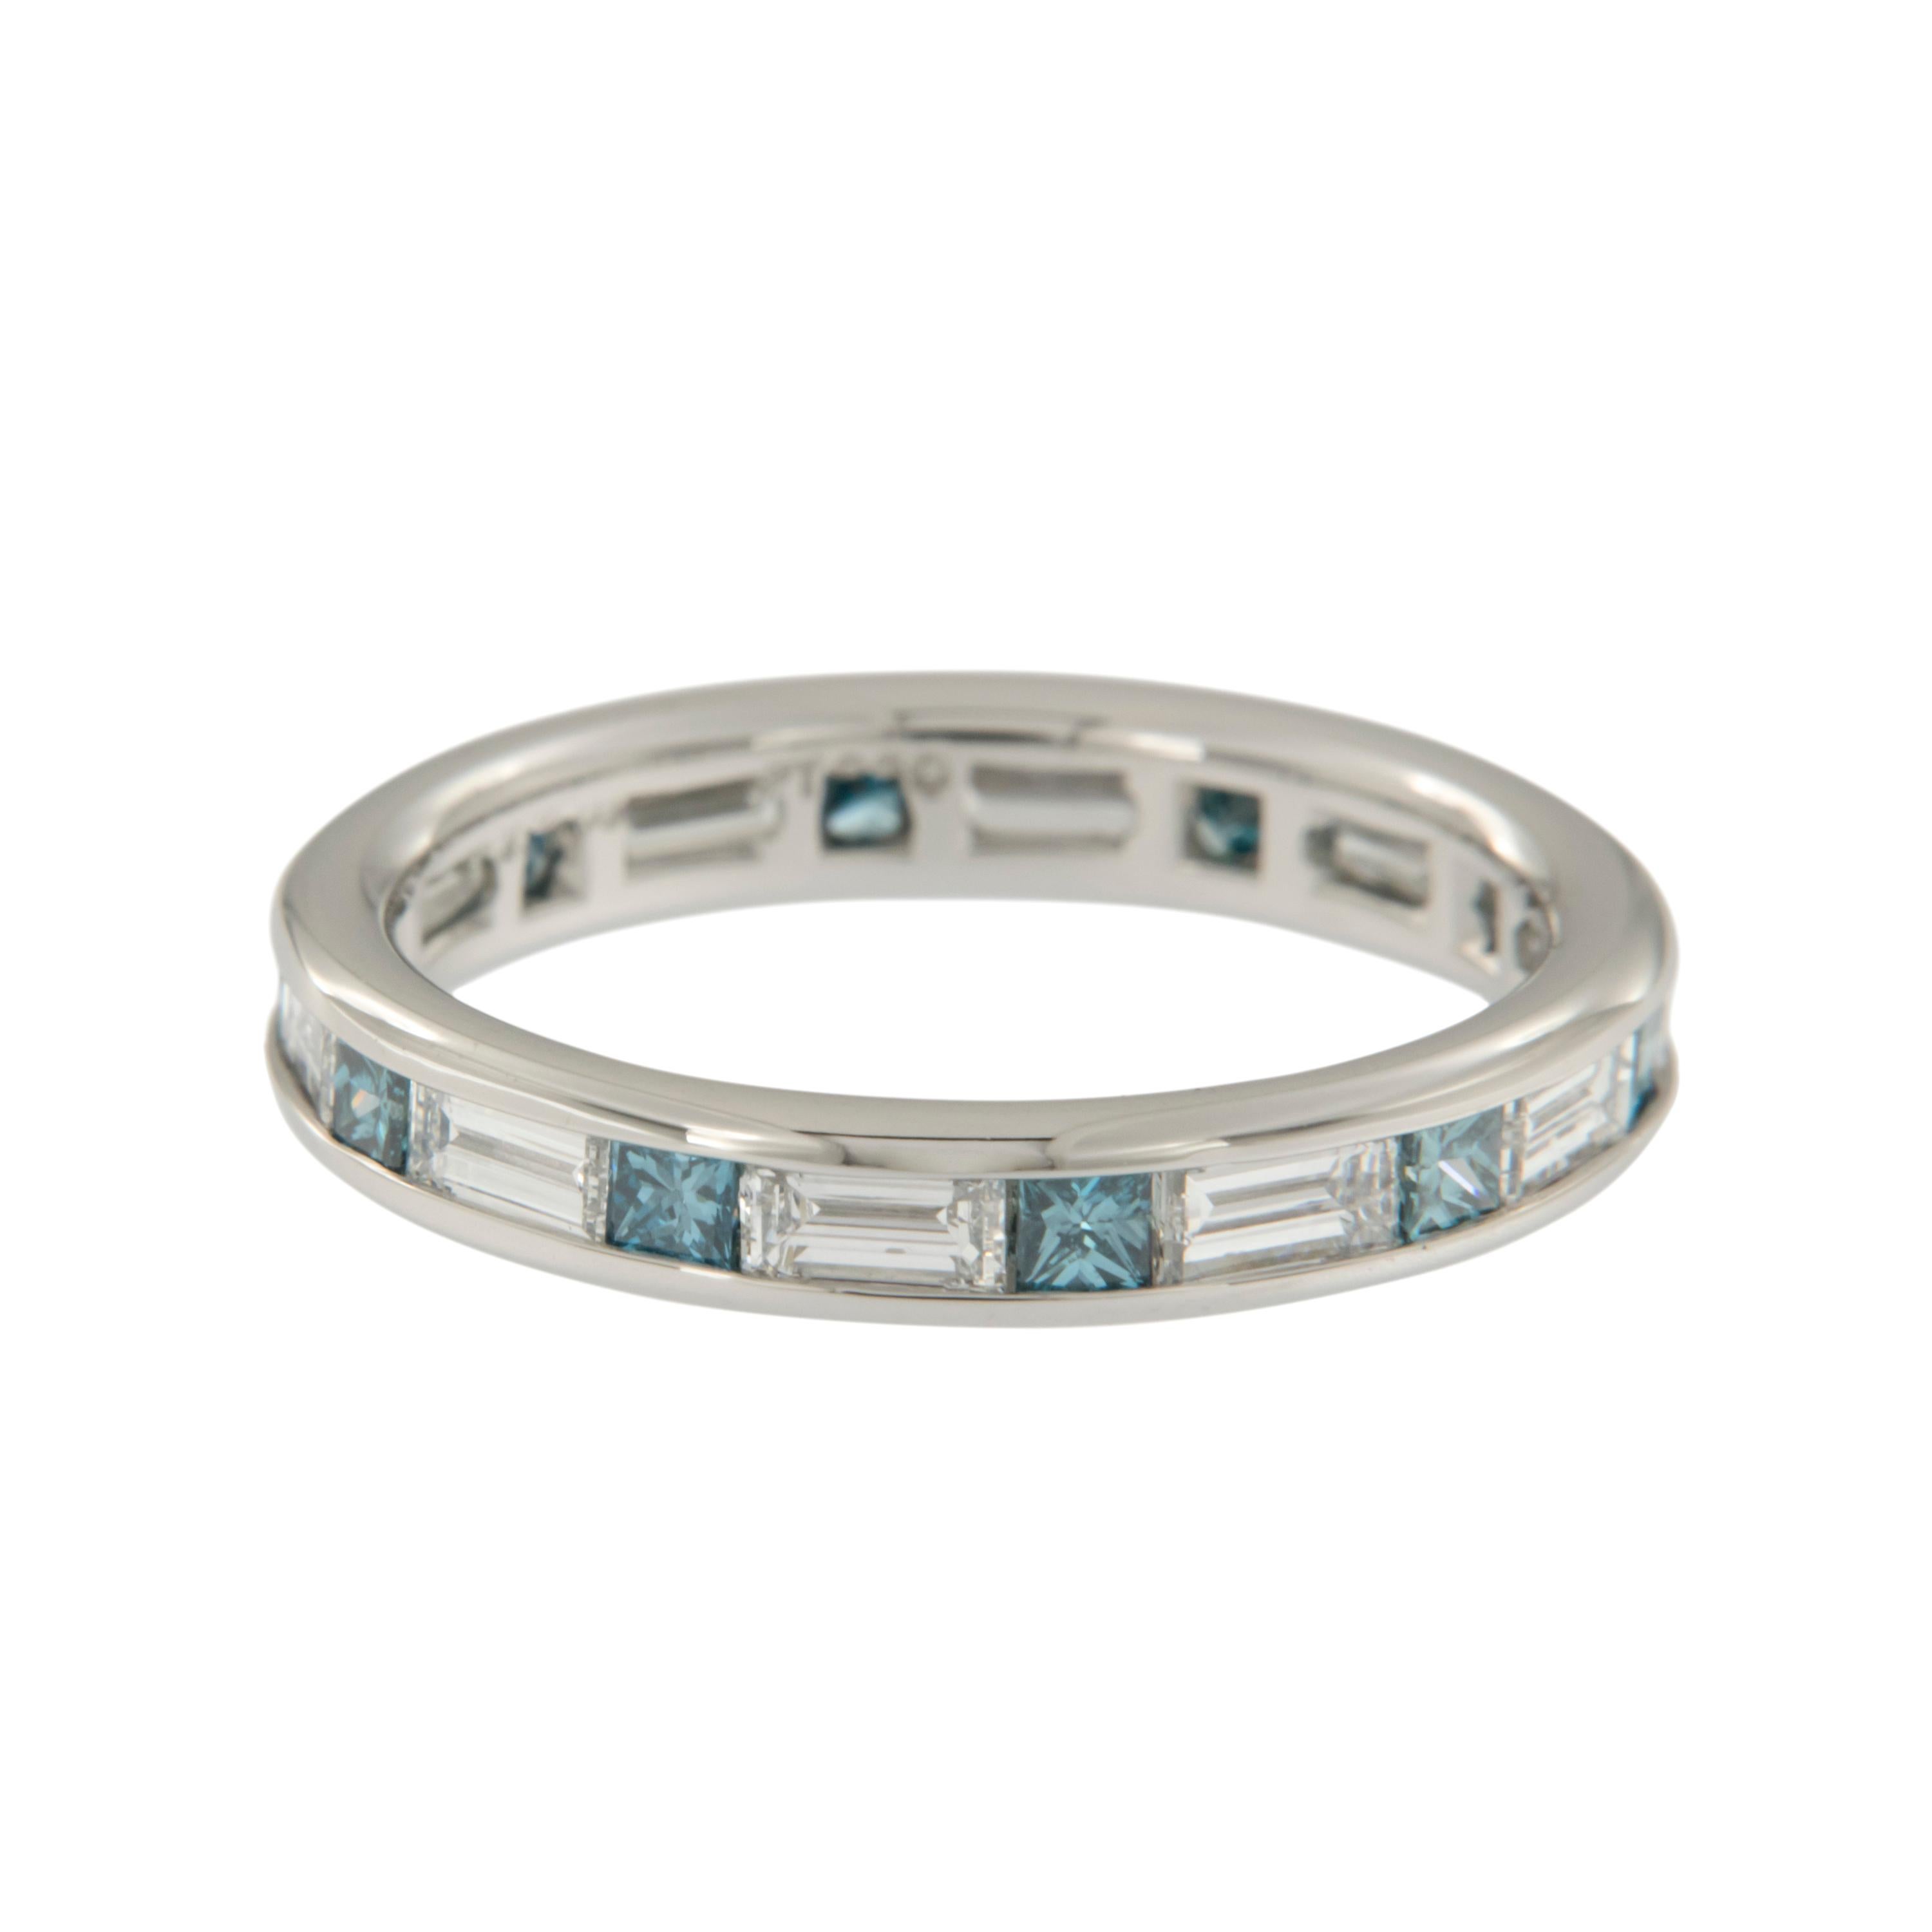 Made in New York, this lovely eternity band has 0.65 Cttw. tranquil treated blue diamonds alternating with 1.30 Cttw white baguette cut diamonds for a stunning contrast of color & diamond cuts. Known for their eloquence & sleek lines, baguette cut